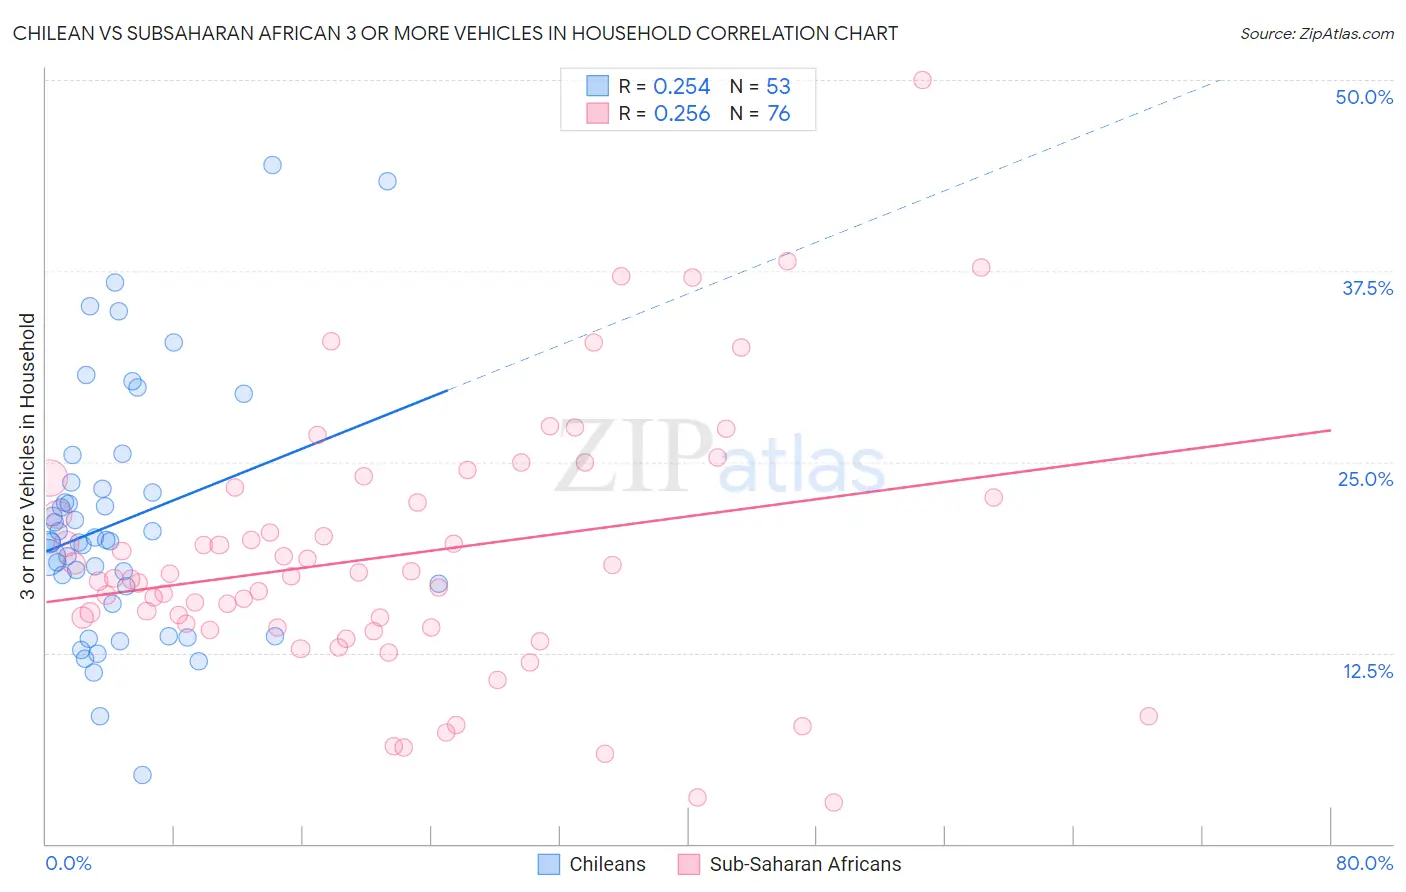 Chilean vs Subsaharan African 3 or more Vehicles in Household